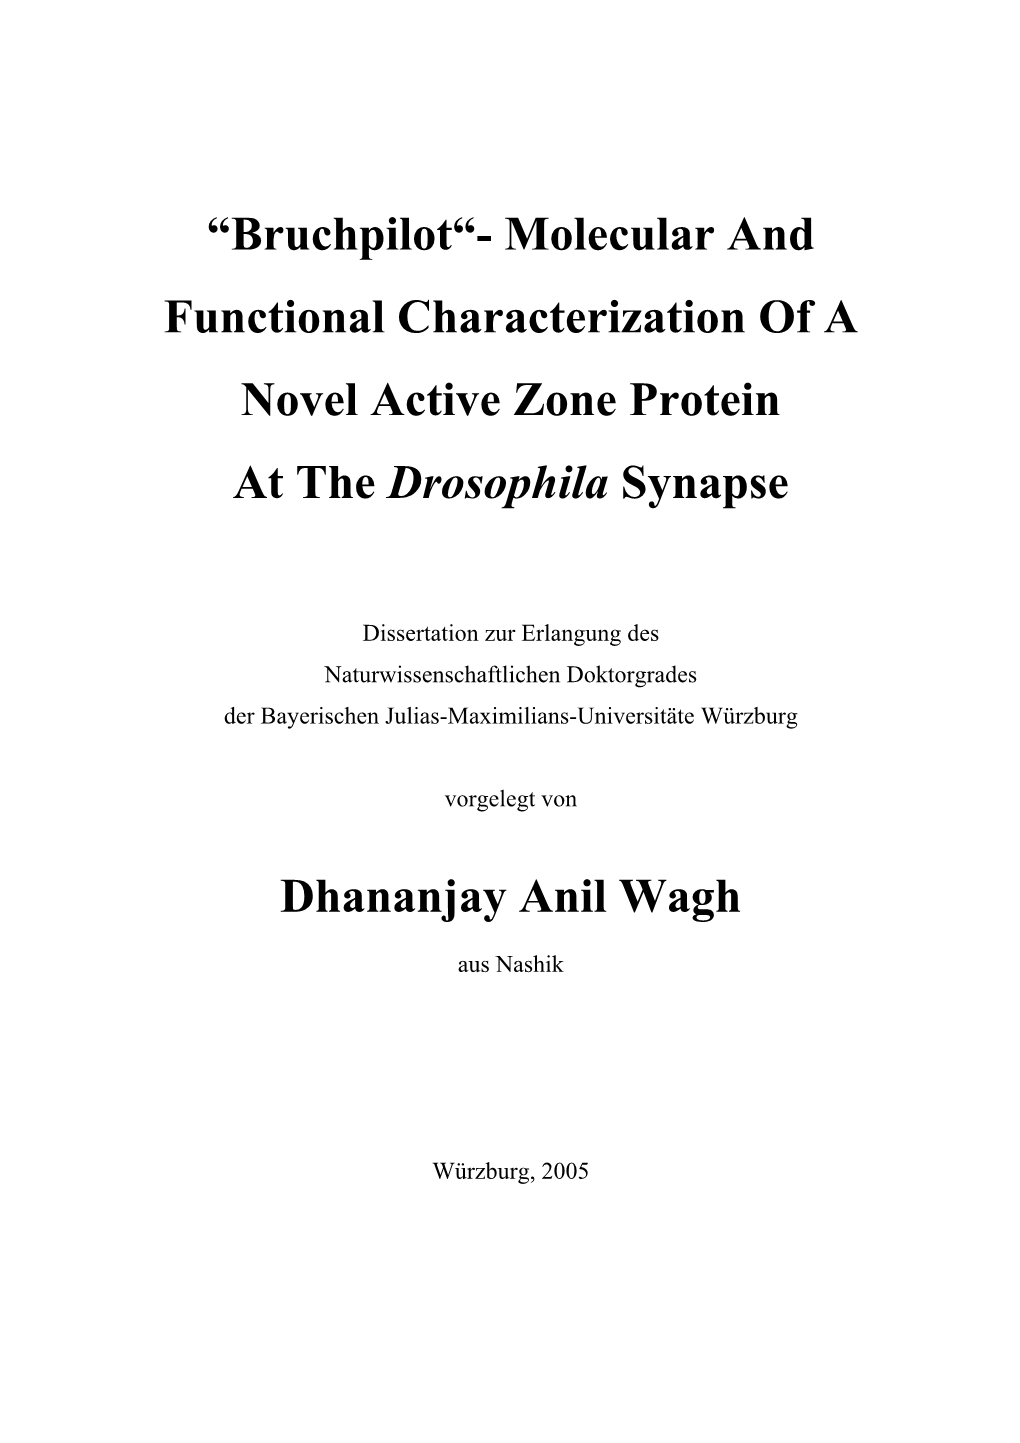 Bruchpilot“- Molecular and Functional Characterization of a Novel Active Zone Protein at the Drosophila Synapse